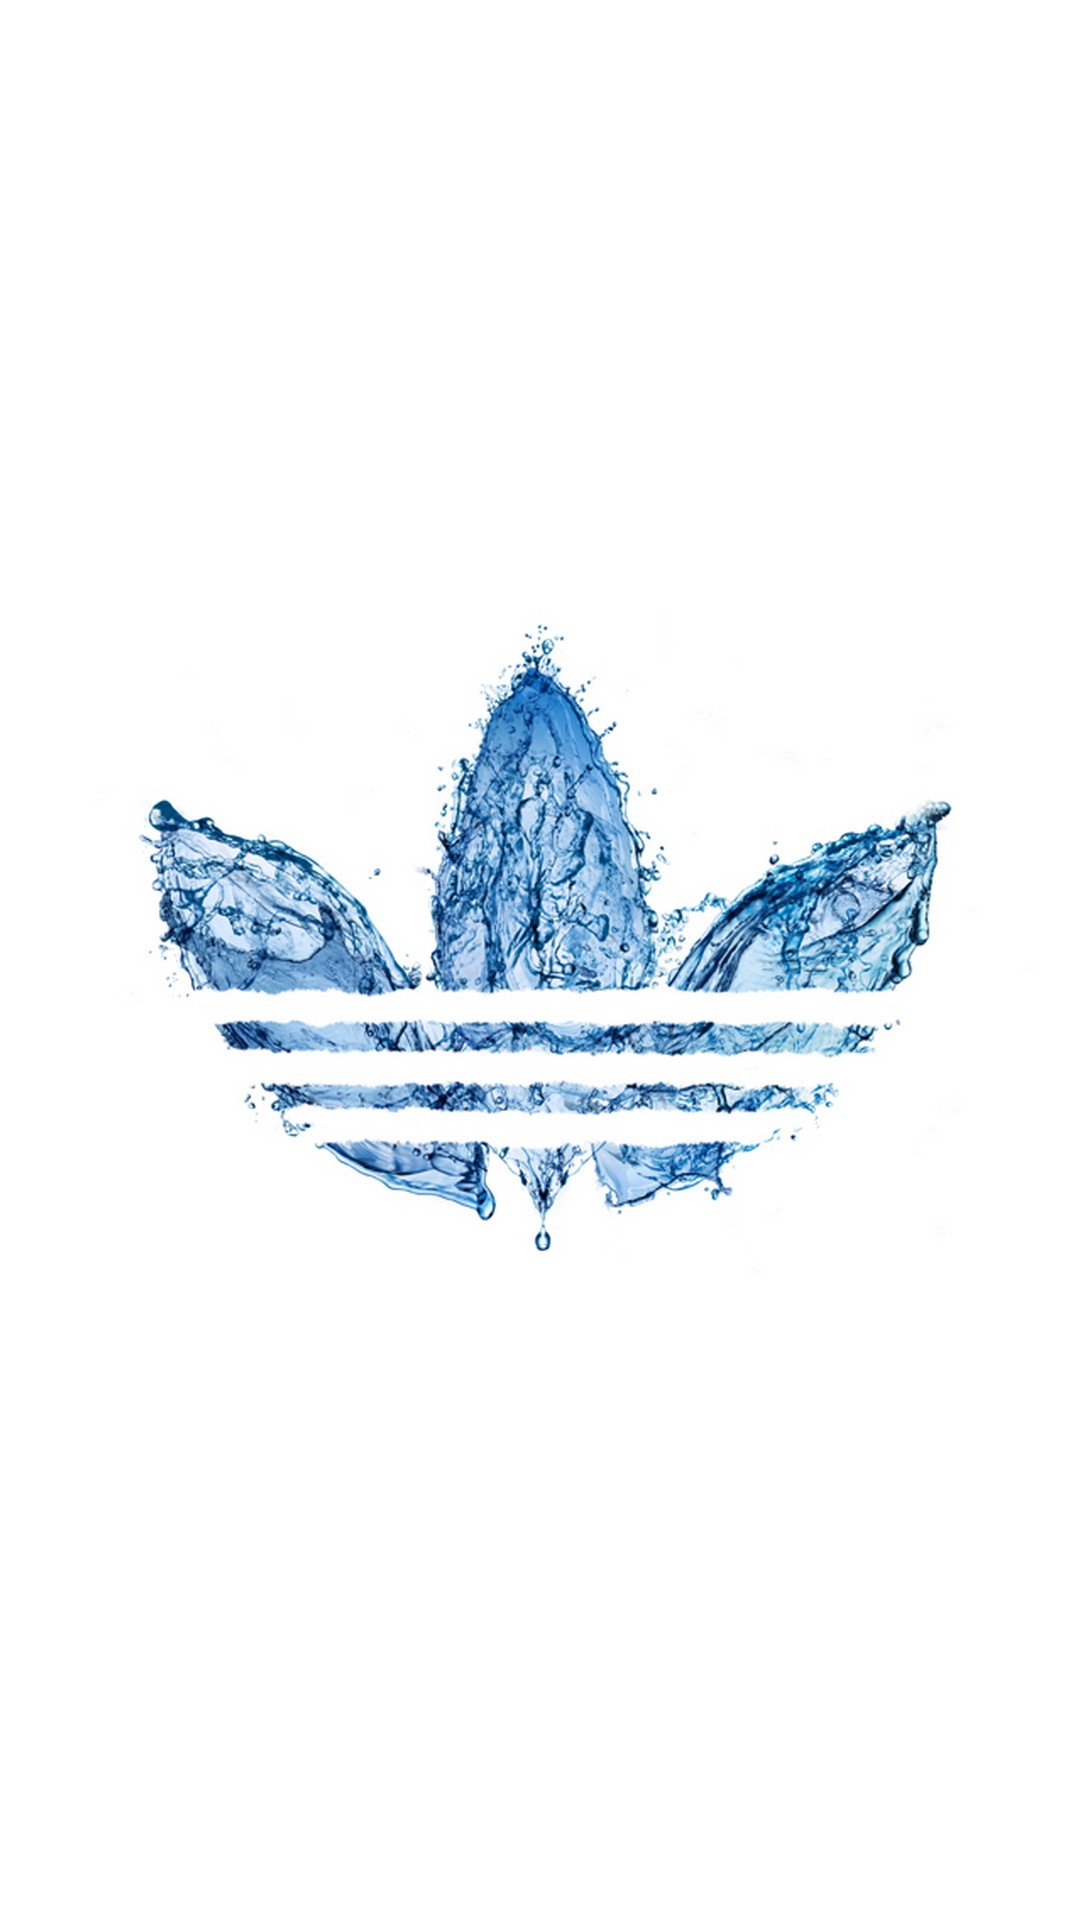 Adidas HD Wallpapers For Mobile With high-resolution 1080X1920 pixel. You can use this wallpaper for your Desktop Computer Backgrounds, Mac Wallpapers, Android Lock screen or iPhone Screensavers and another smartphone device